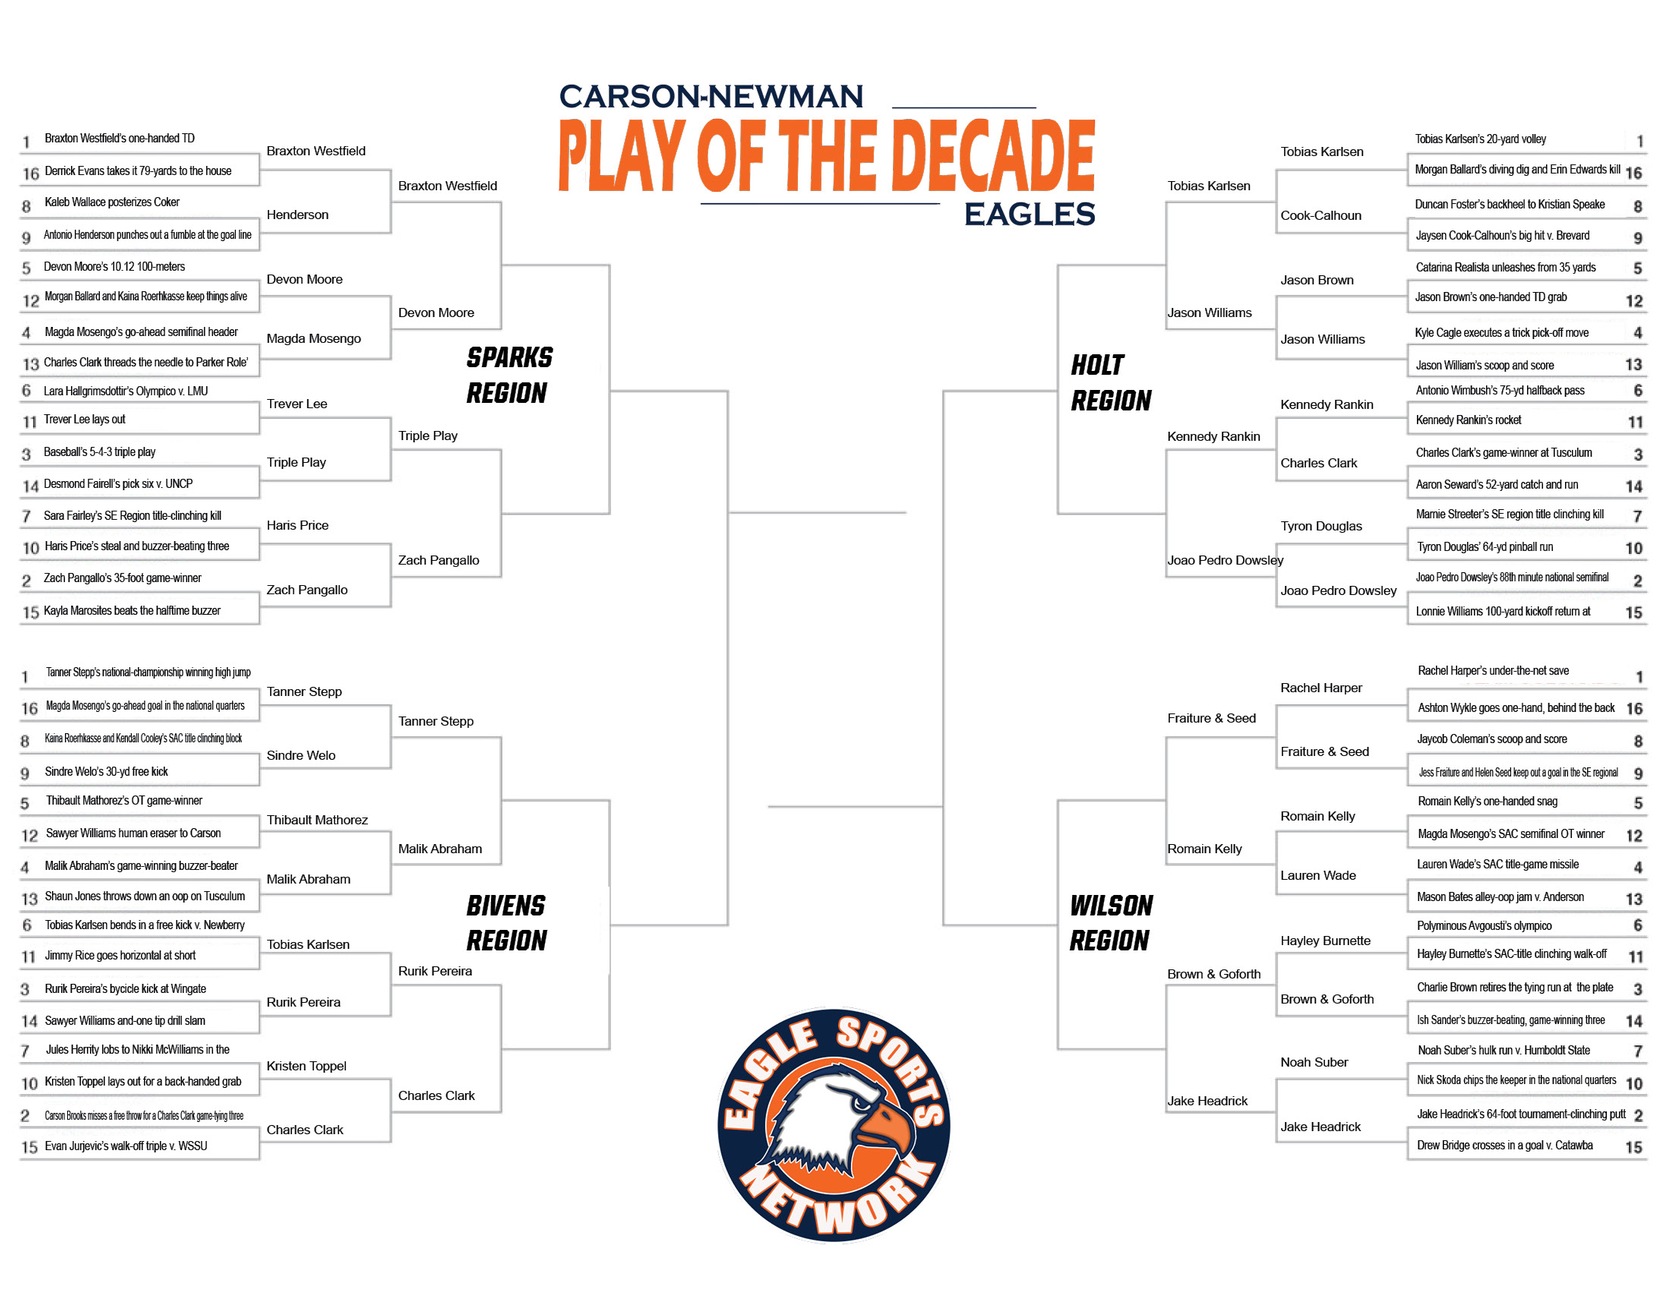 Two double-digit seeds advance to region semifinals in Play of the Decade voting